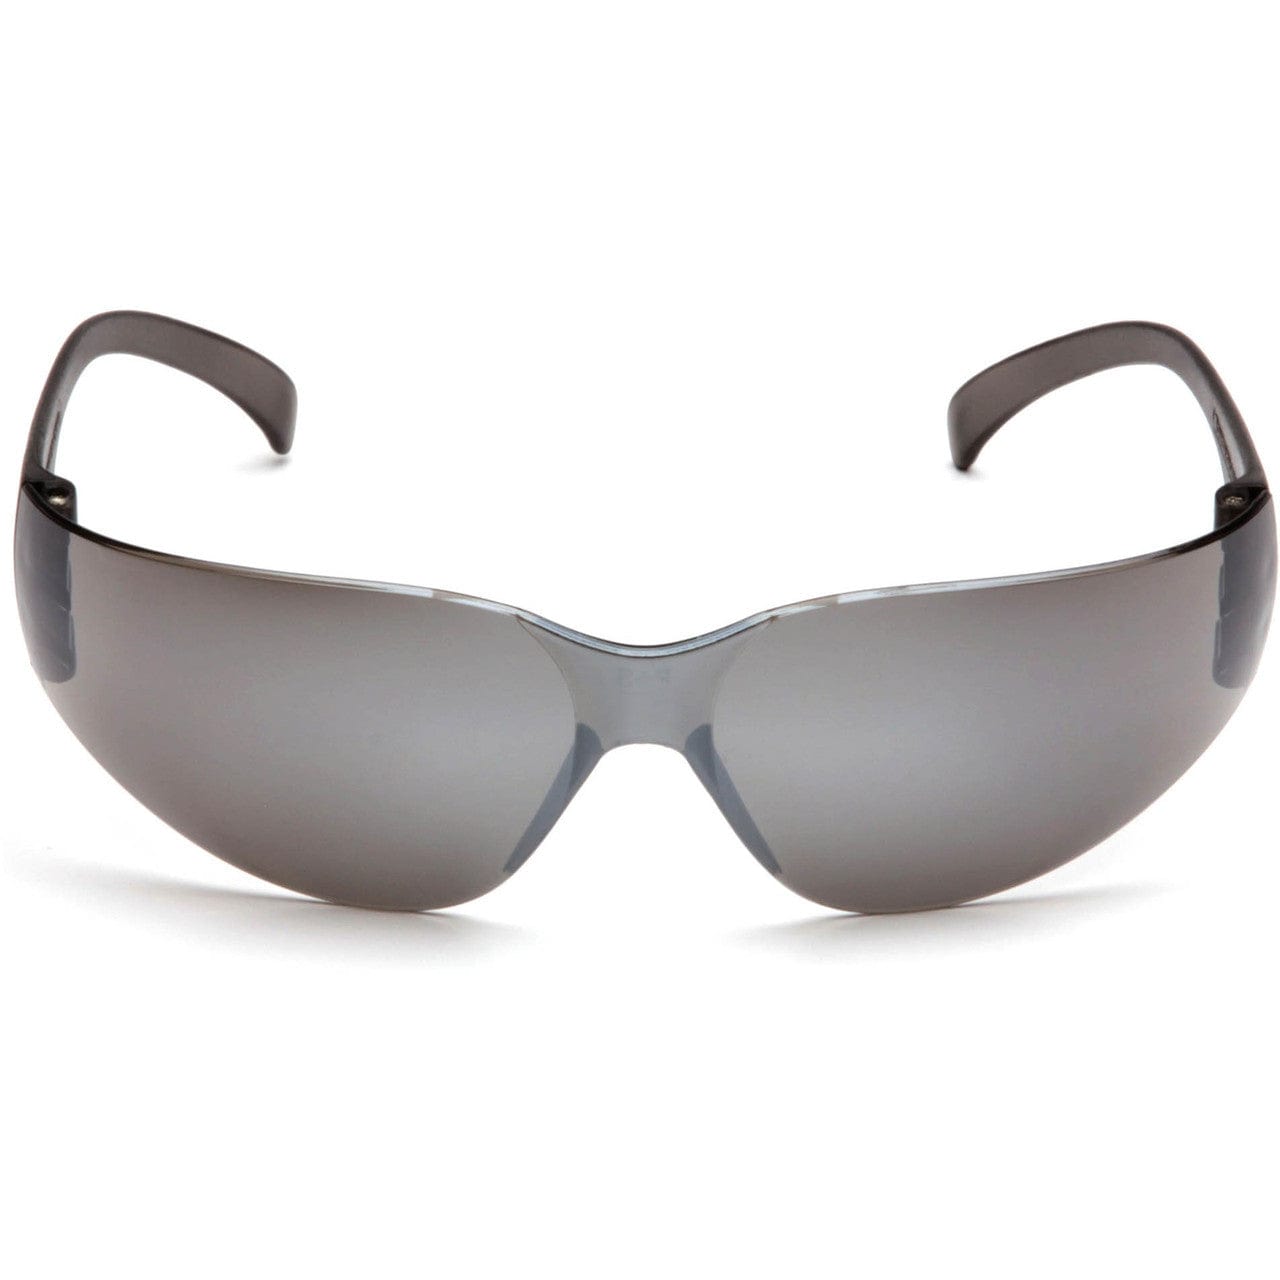 Pyramex Intruder Safety Glasses with Silver Mirror Lens S4170S Front View